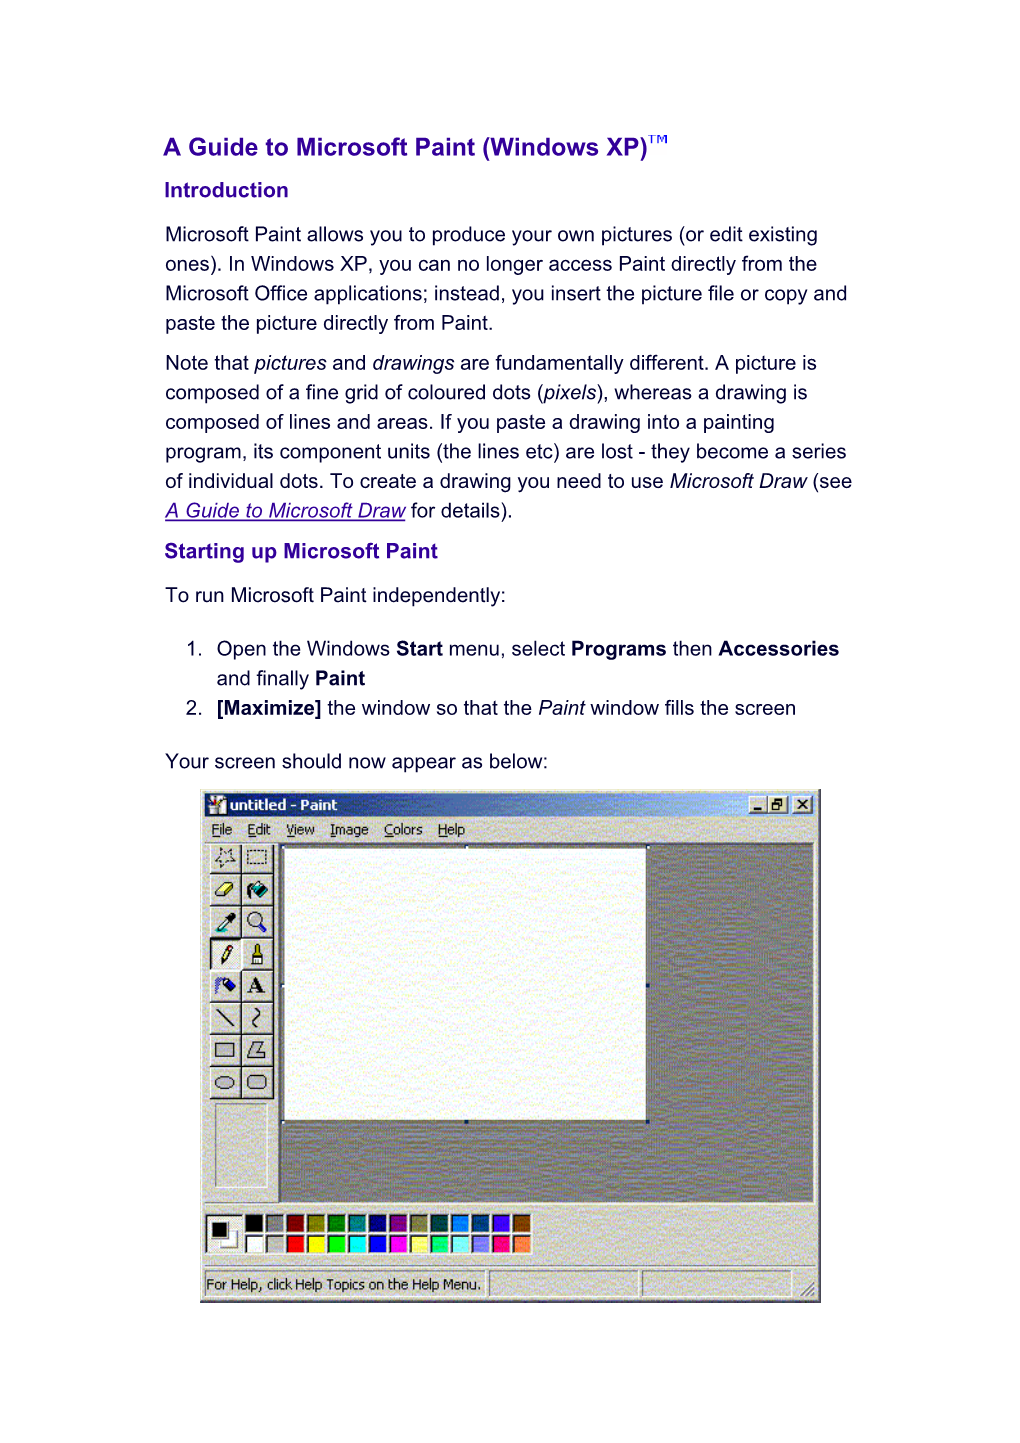 A Guide to Microsoft Paint (Windows XP) Introduction